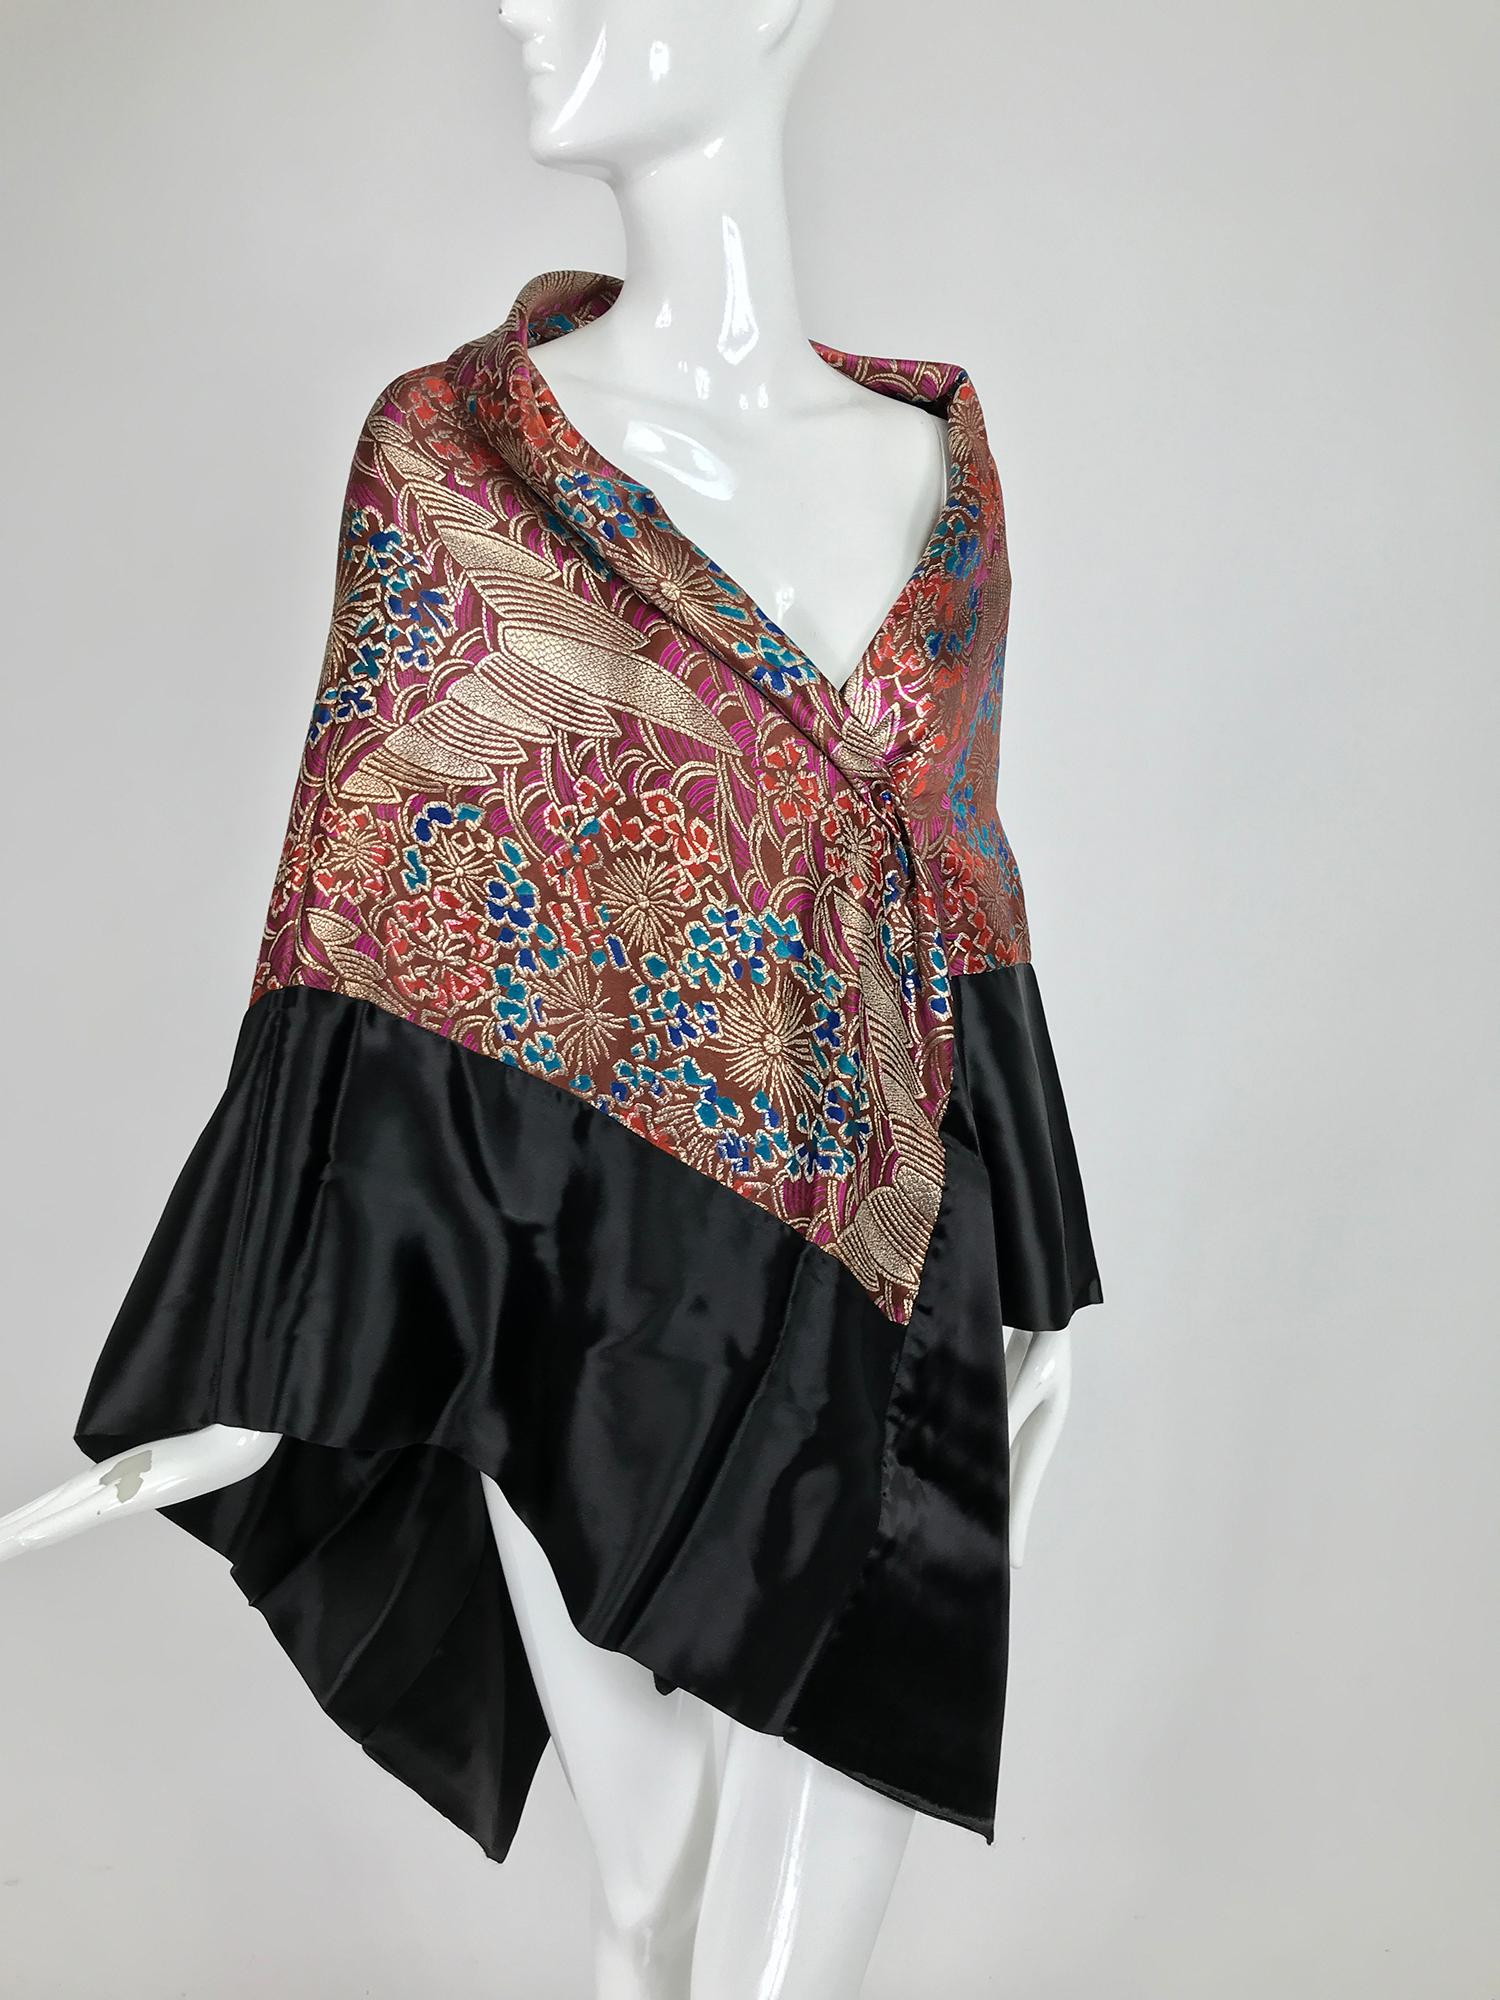 1920s Art Deco metallic brocade square shawl with black satin border. 
A beautiful shawl with an inset of 1920s metallic silk brocade that features Art Deco motifs. Deep wide border of black satin. The back of the shawl has some oxidation marks